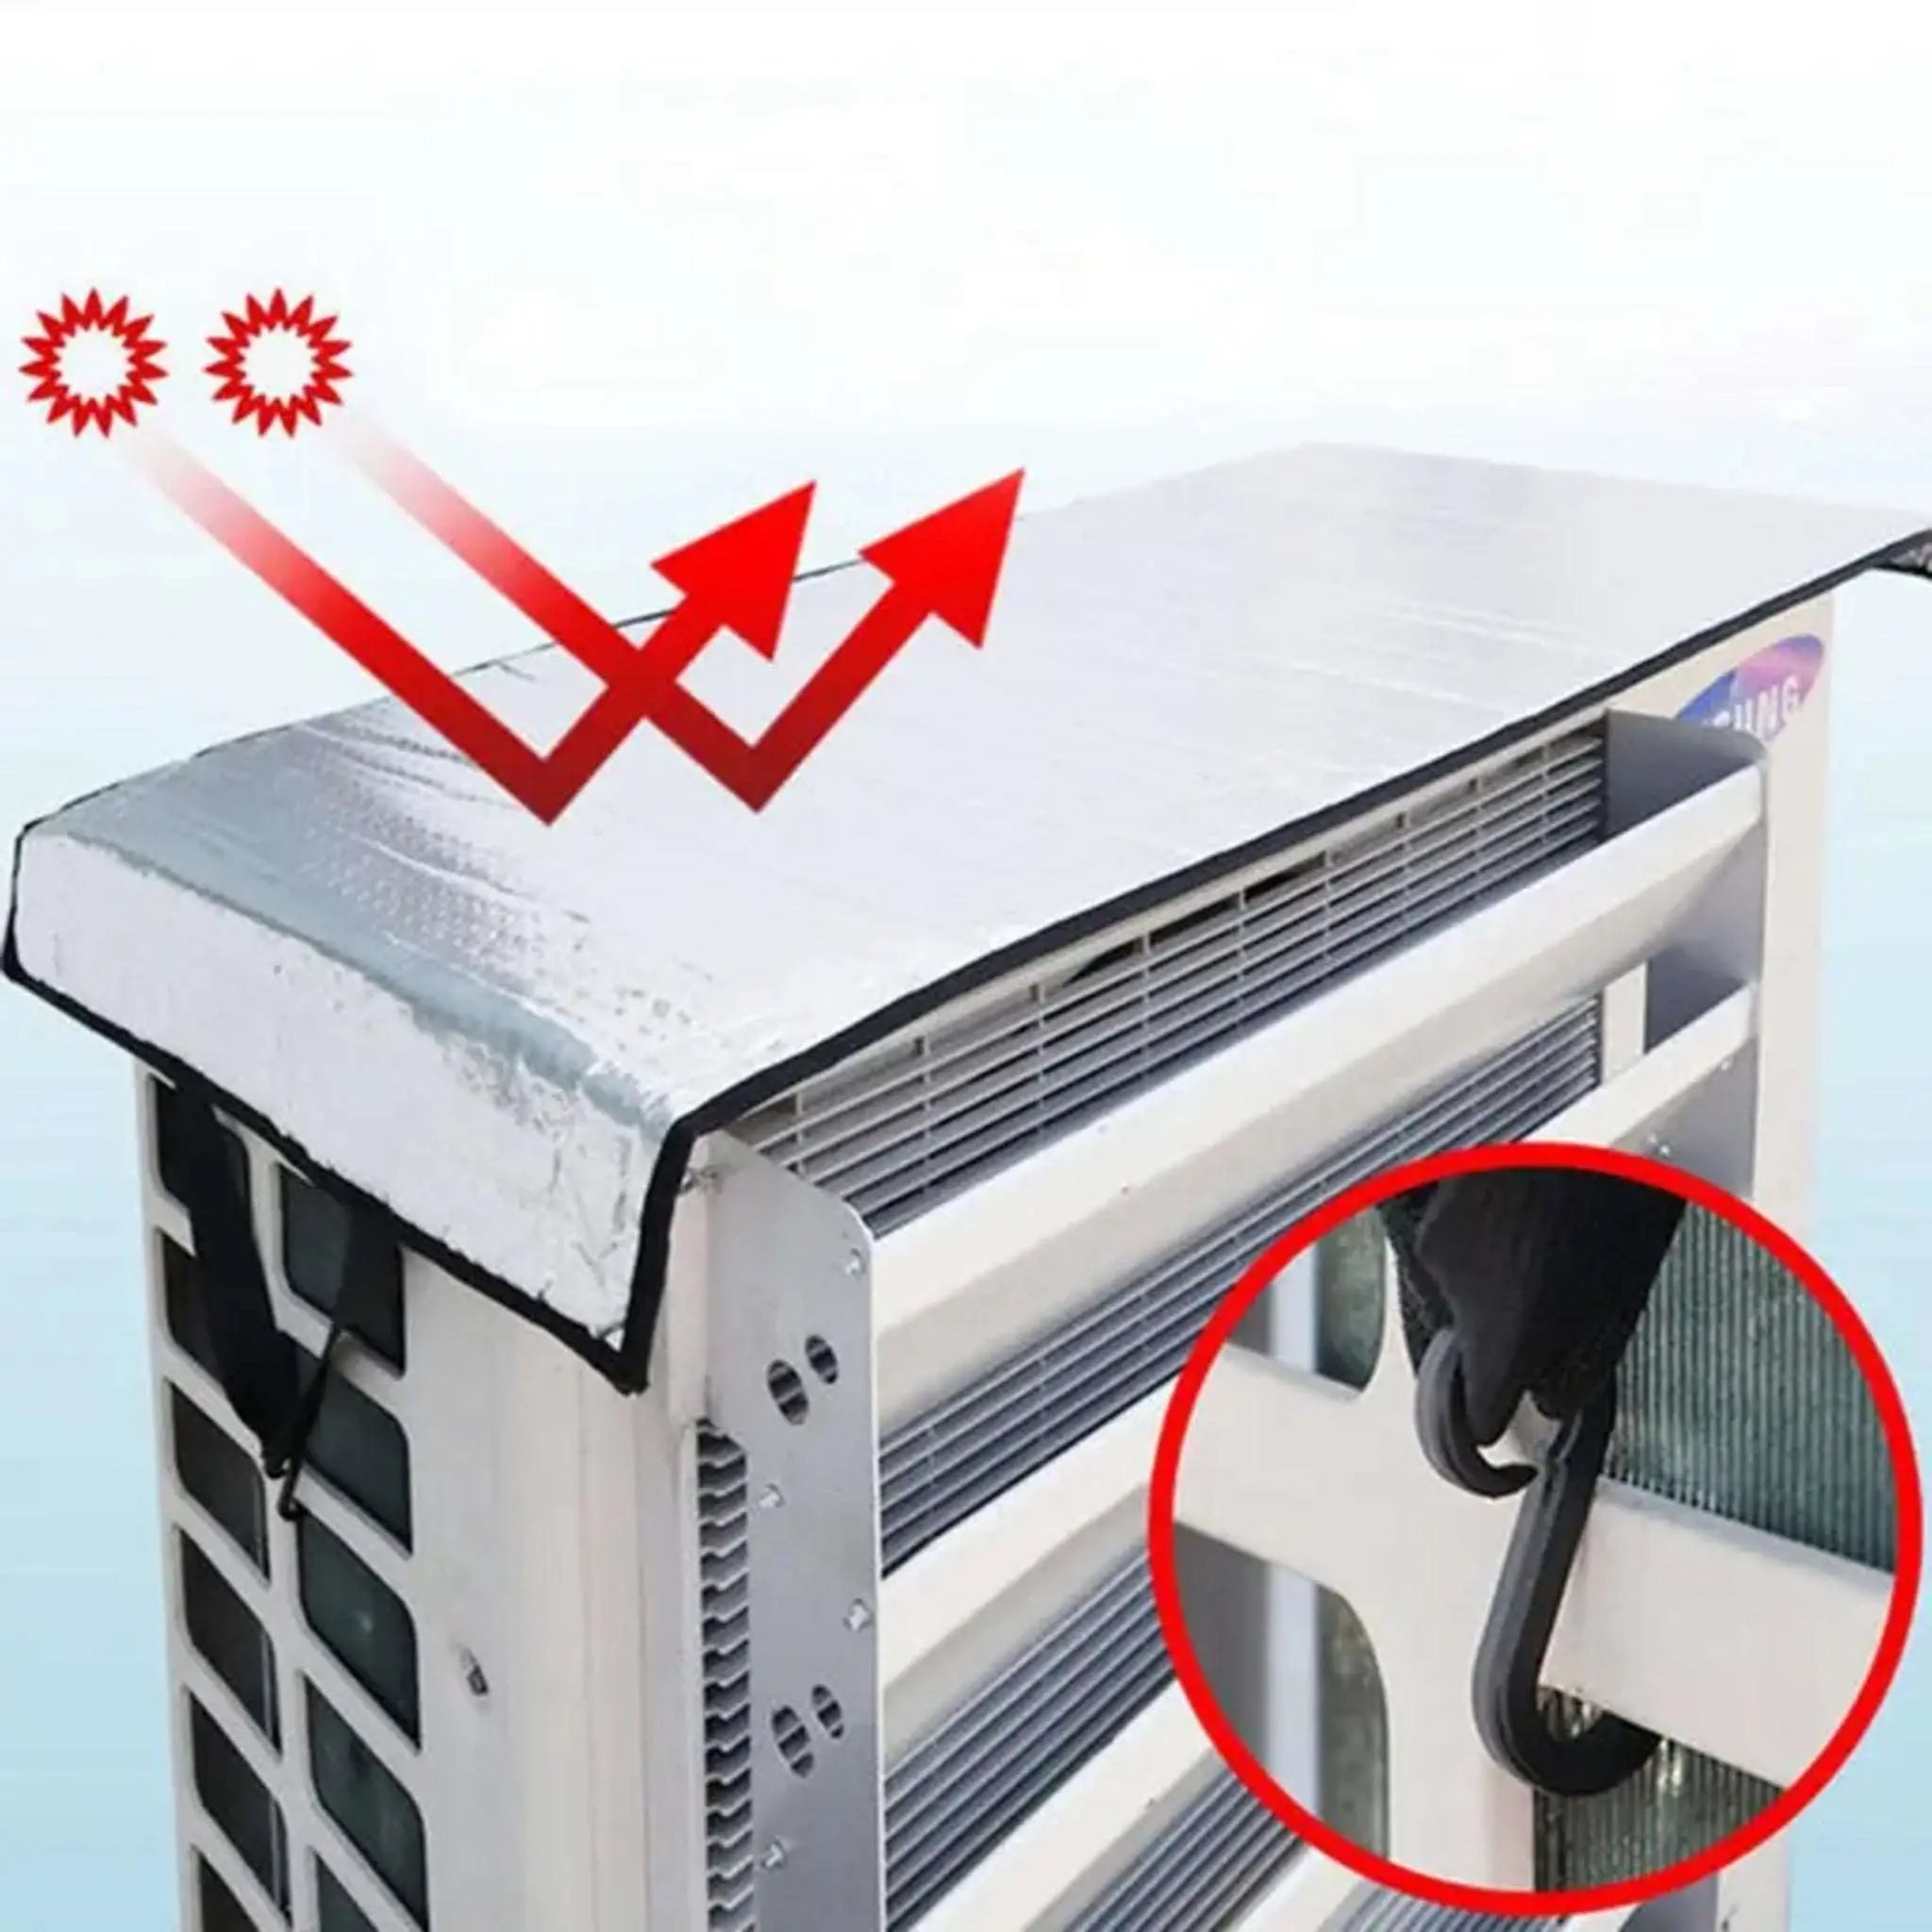 Outdoor weatherproof Air Conditioning Cover